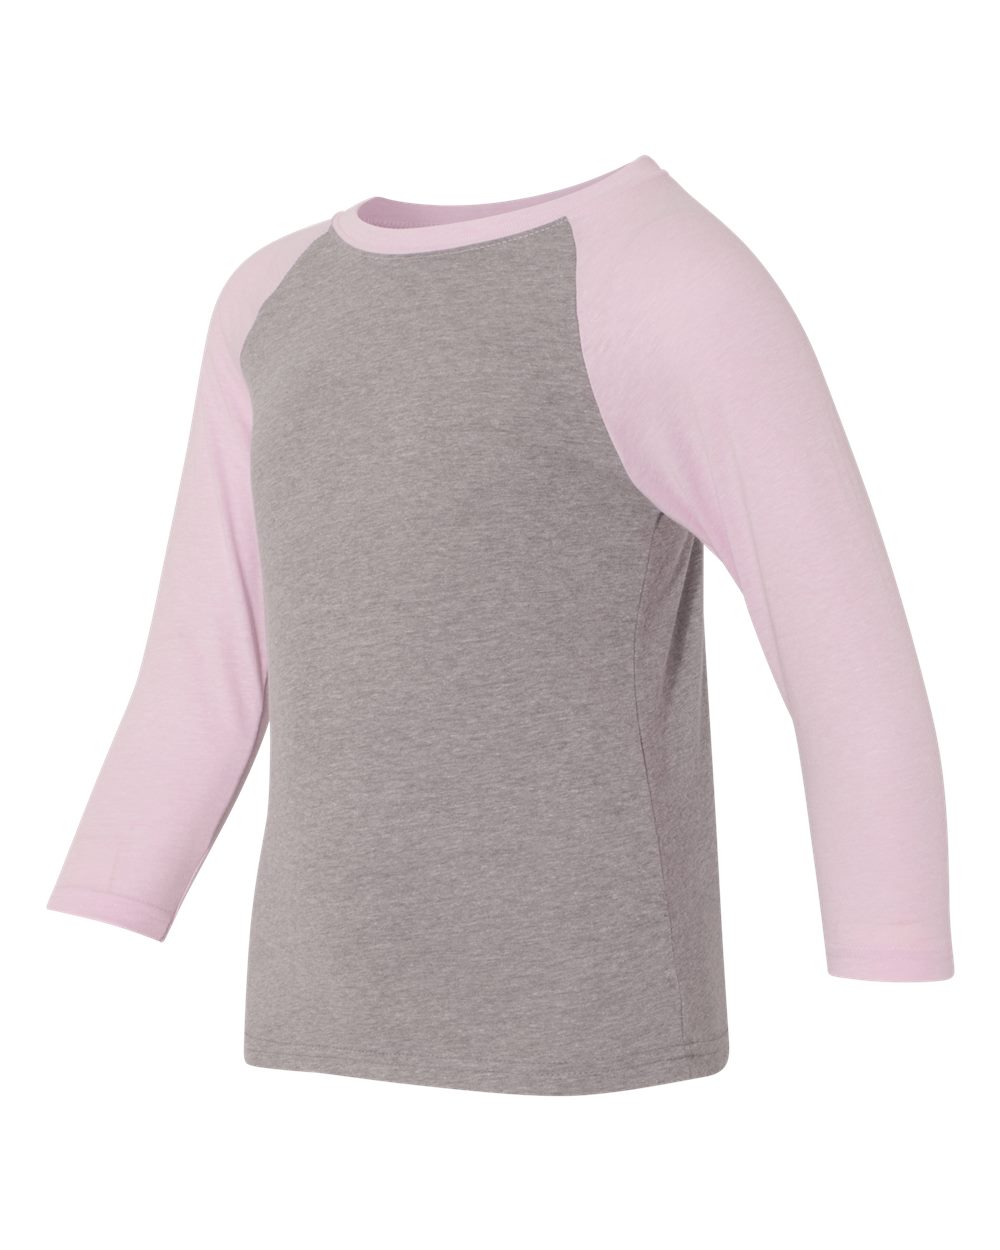 click to view Lilac Sleeves/ Dark Heather Grey Body